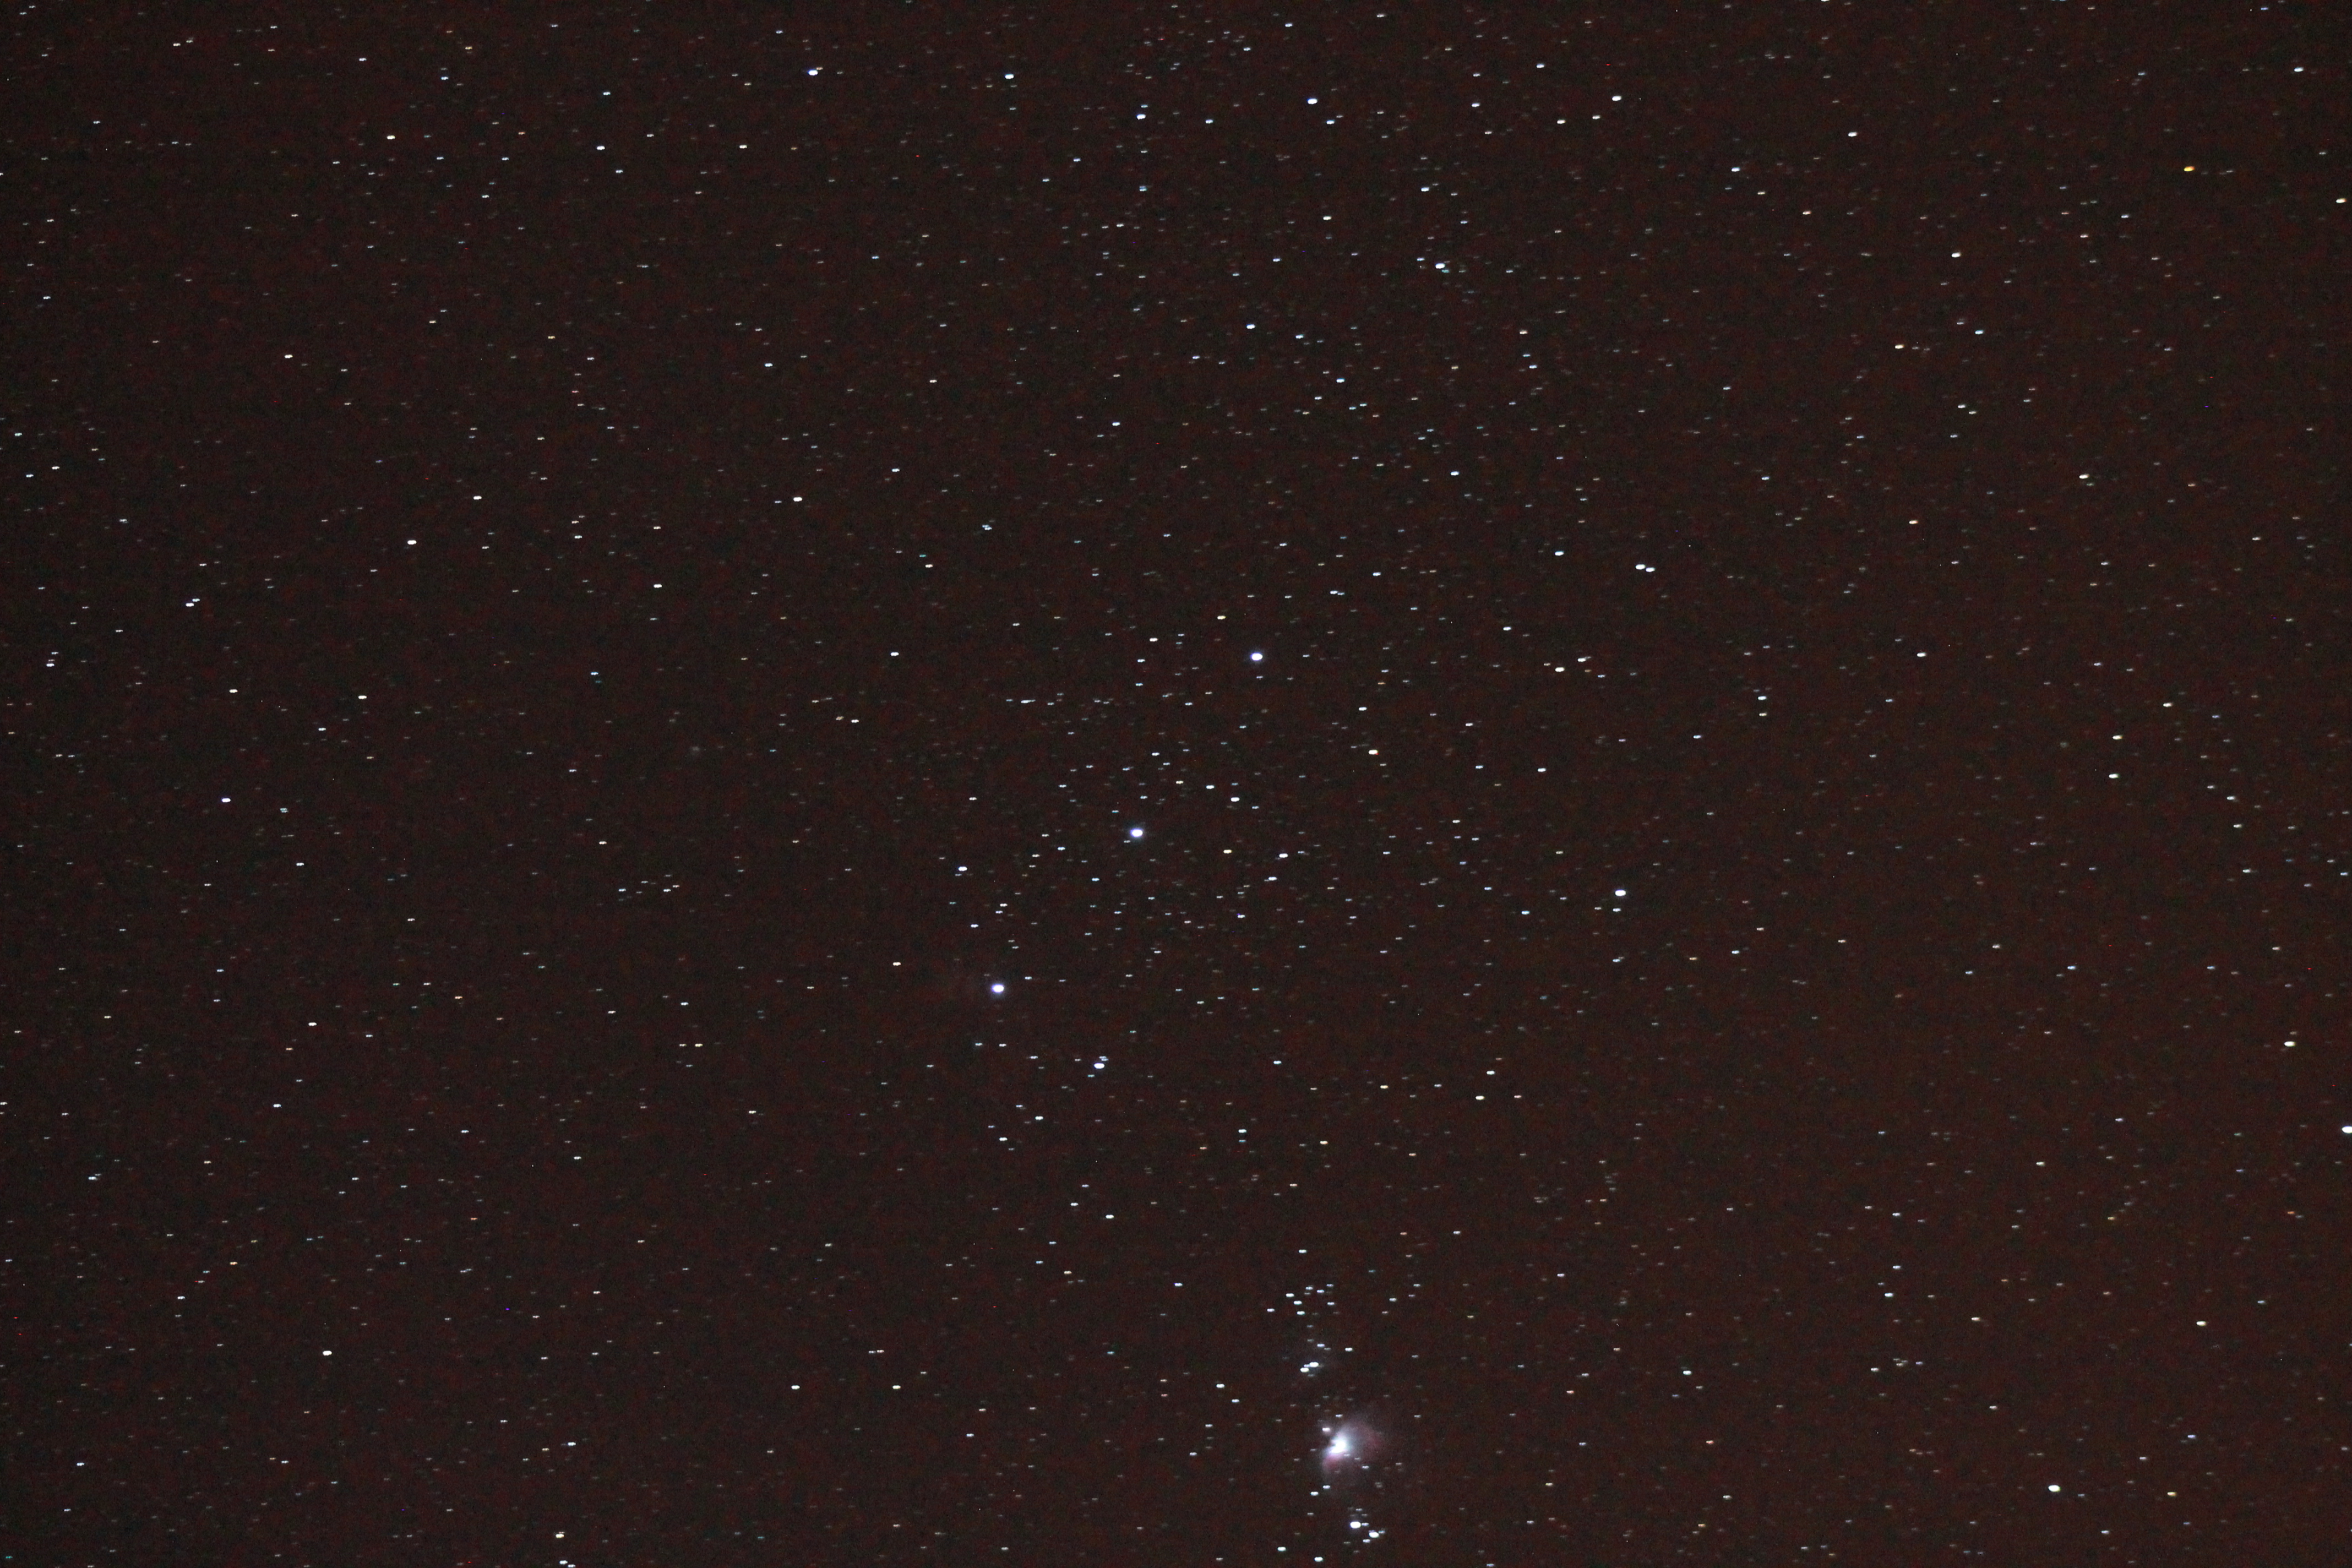 A 10 second exposure of the belt and sword of Orion, showing the Orion Nebula